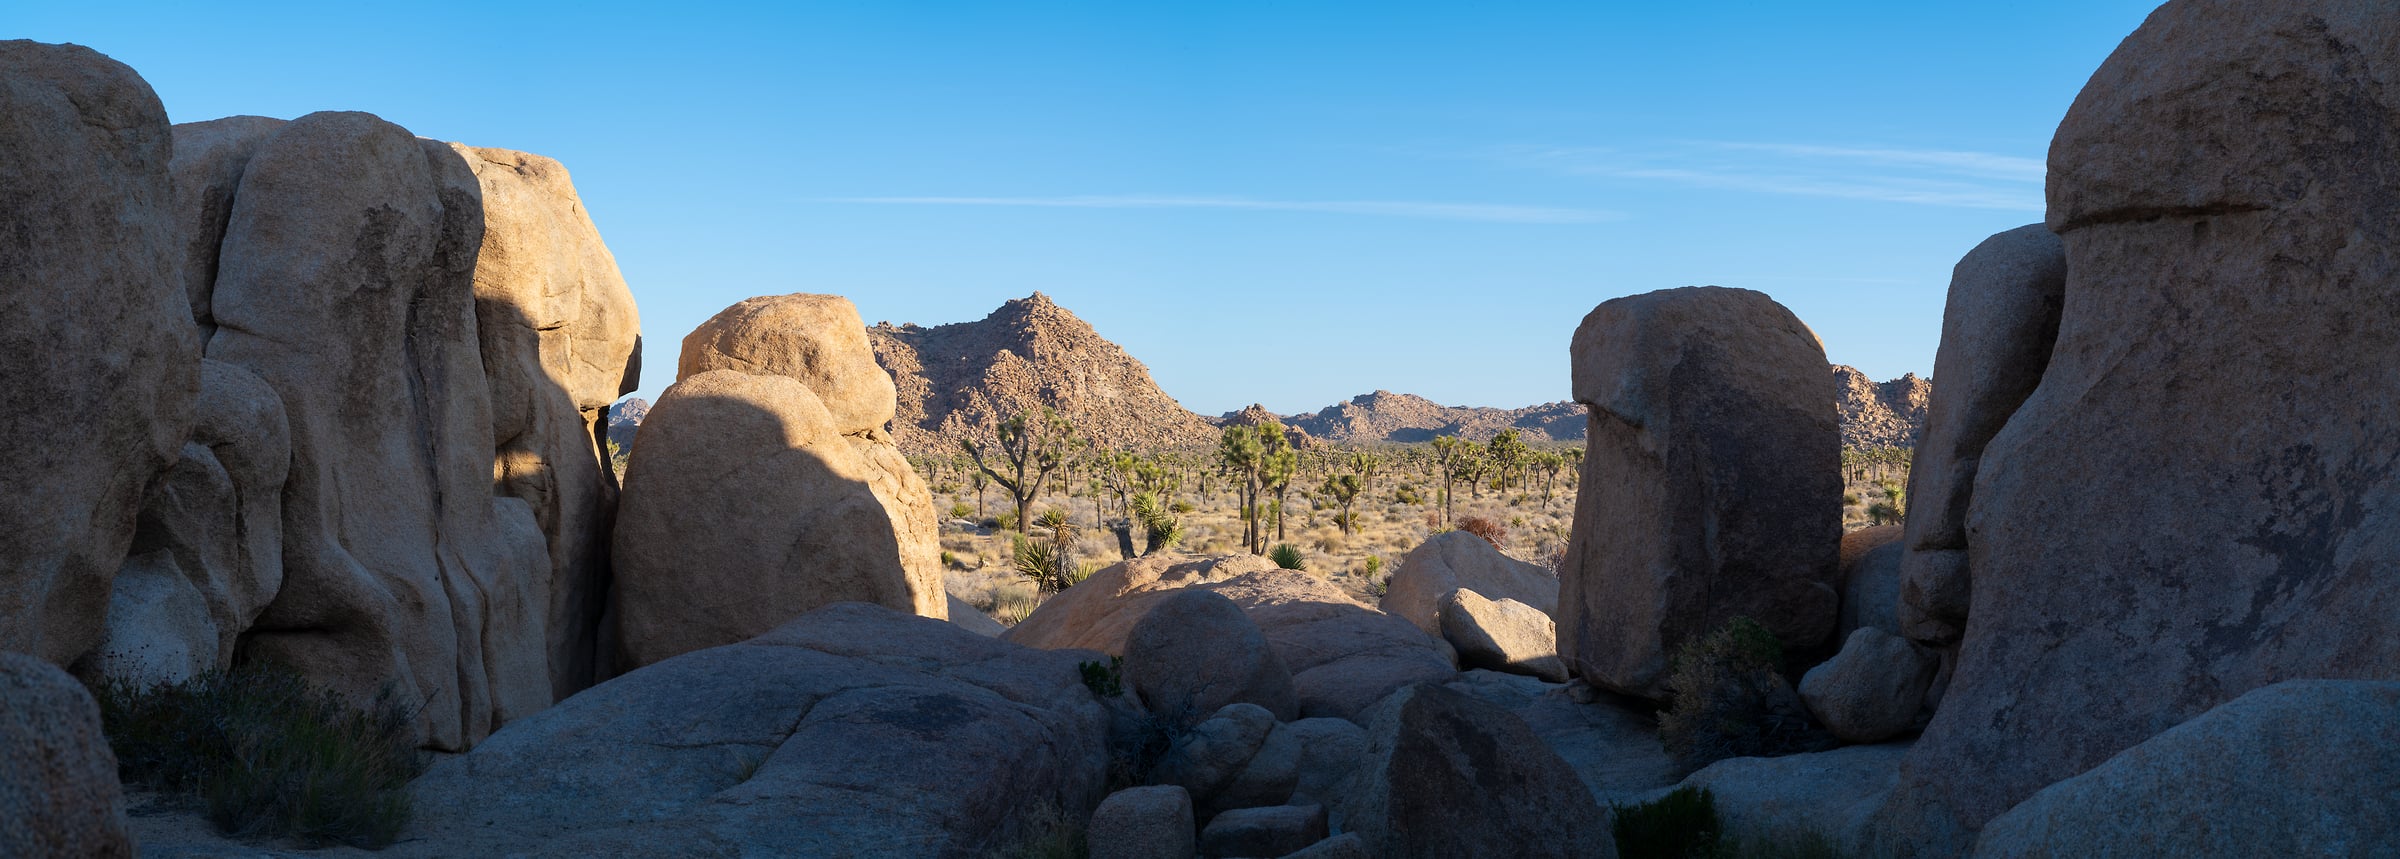 191 megapixels! A very high resolution, large-format VAST photo print of boulders and trees; wide photograph created by Greg Probst in Joshua Tree National Park, California.